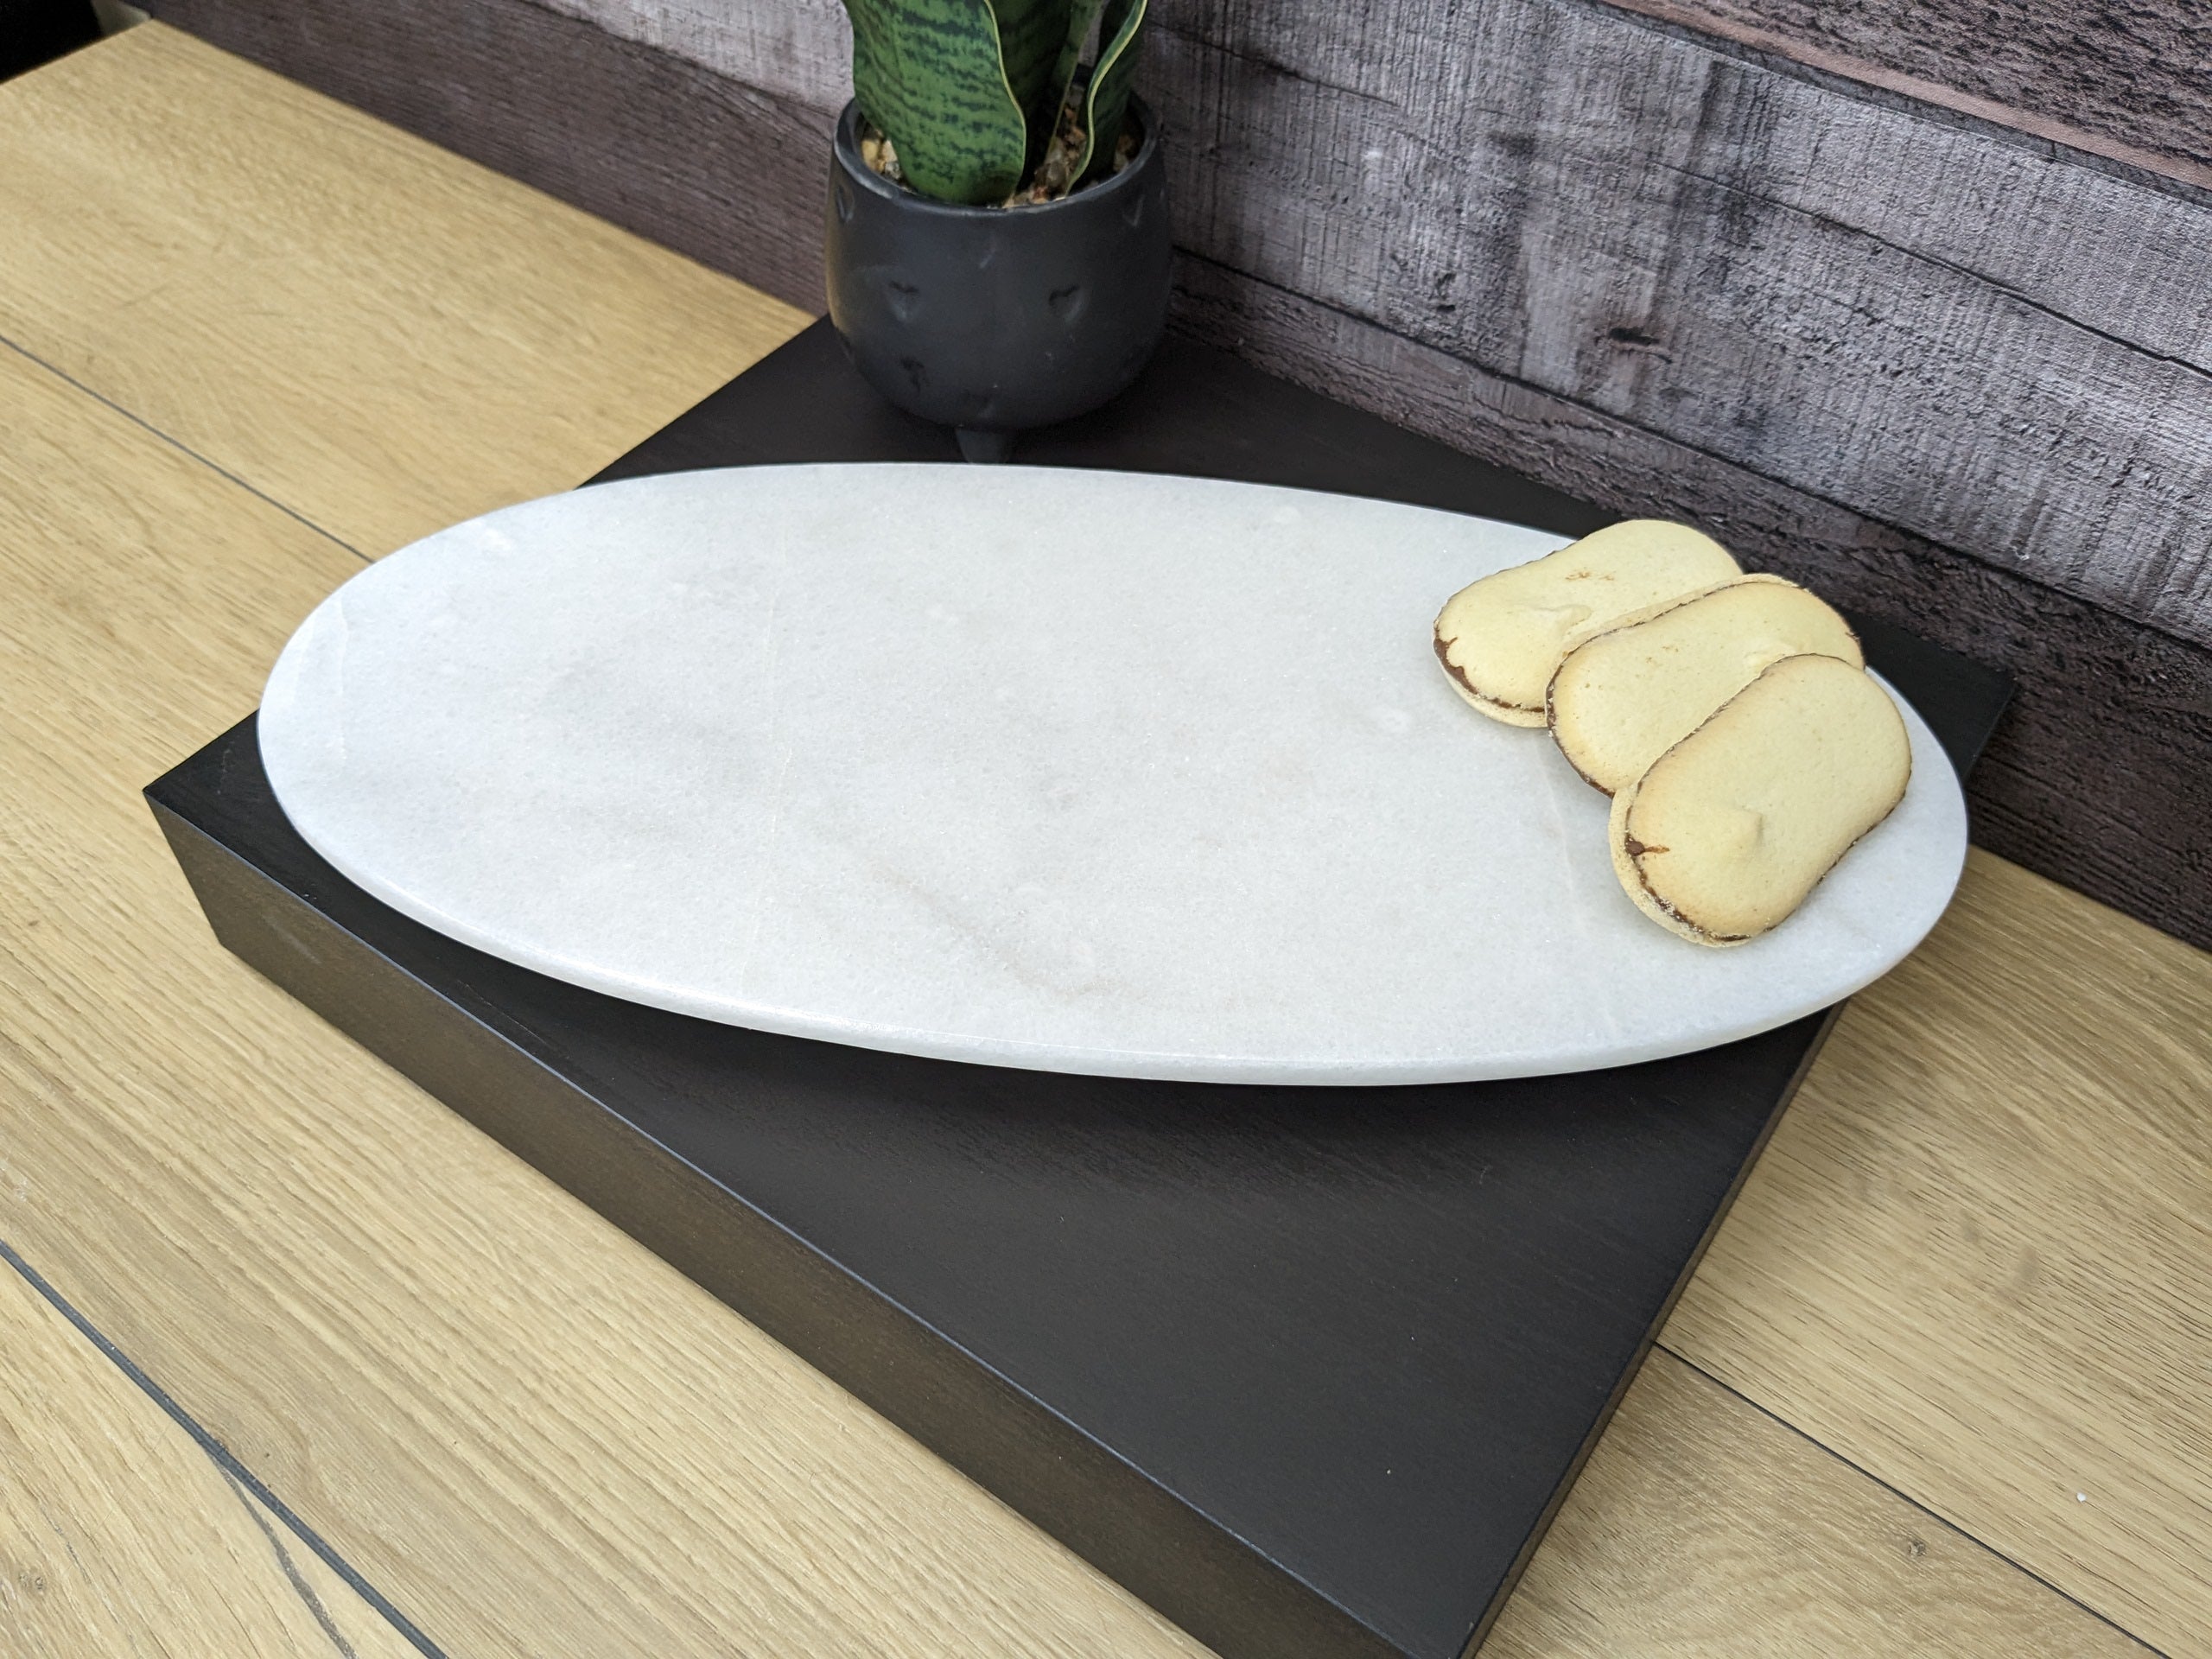 White and Gray Marble Charcuterie Board and Serving Platter. Handmade in Mexico. We package and ship from the USA. Buy now at www.felipeandgrace.com.